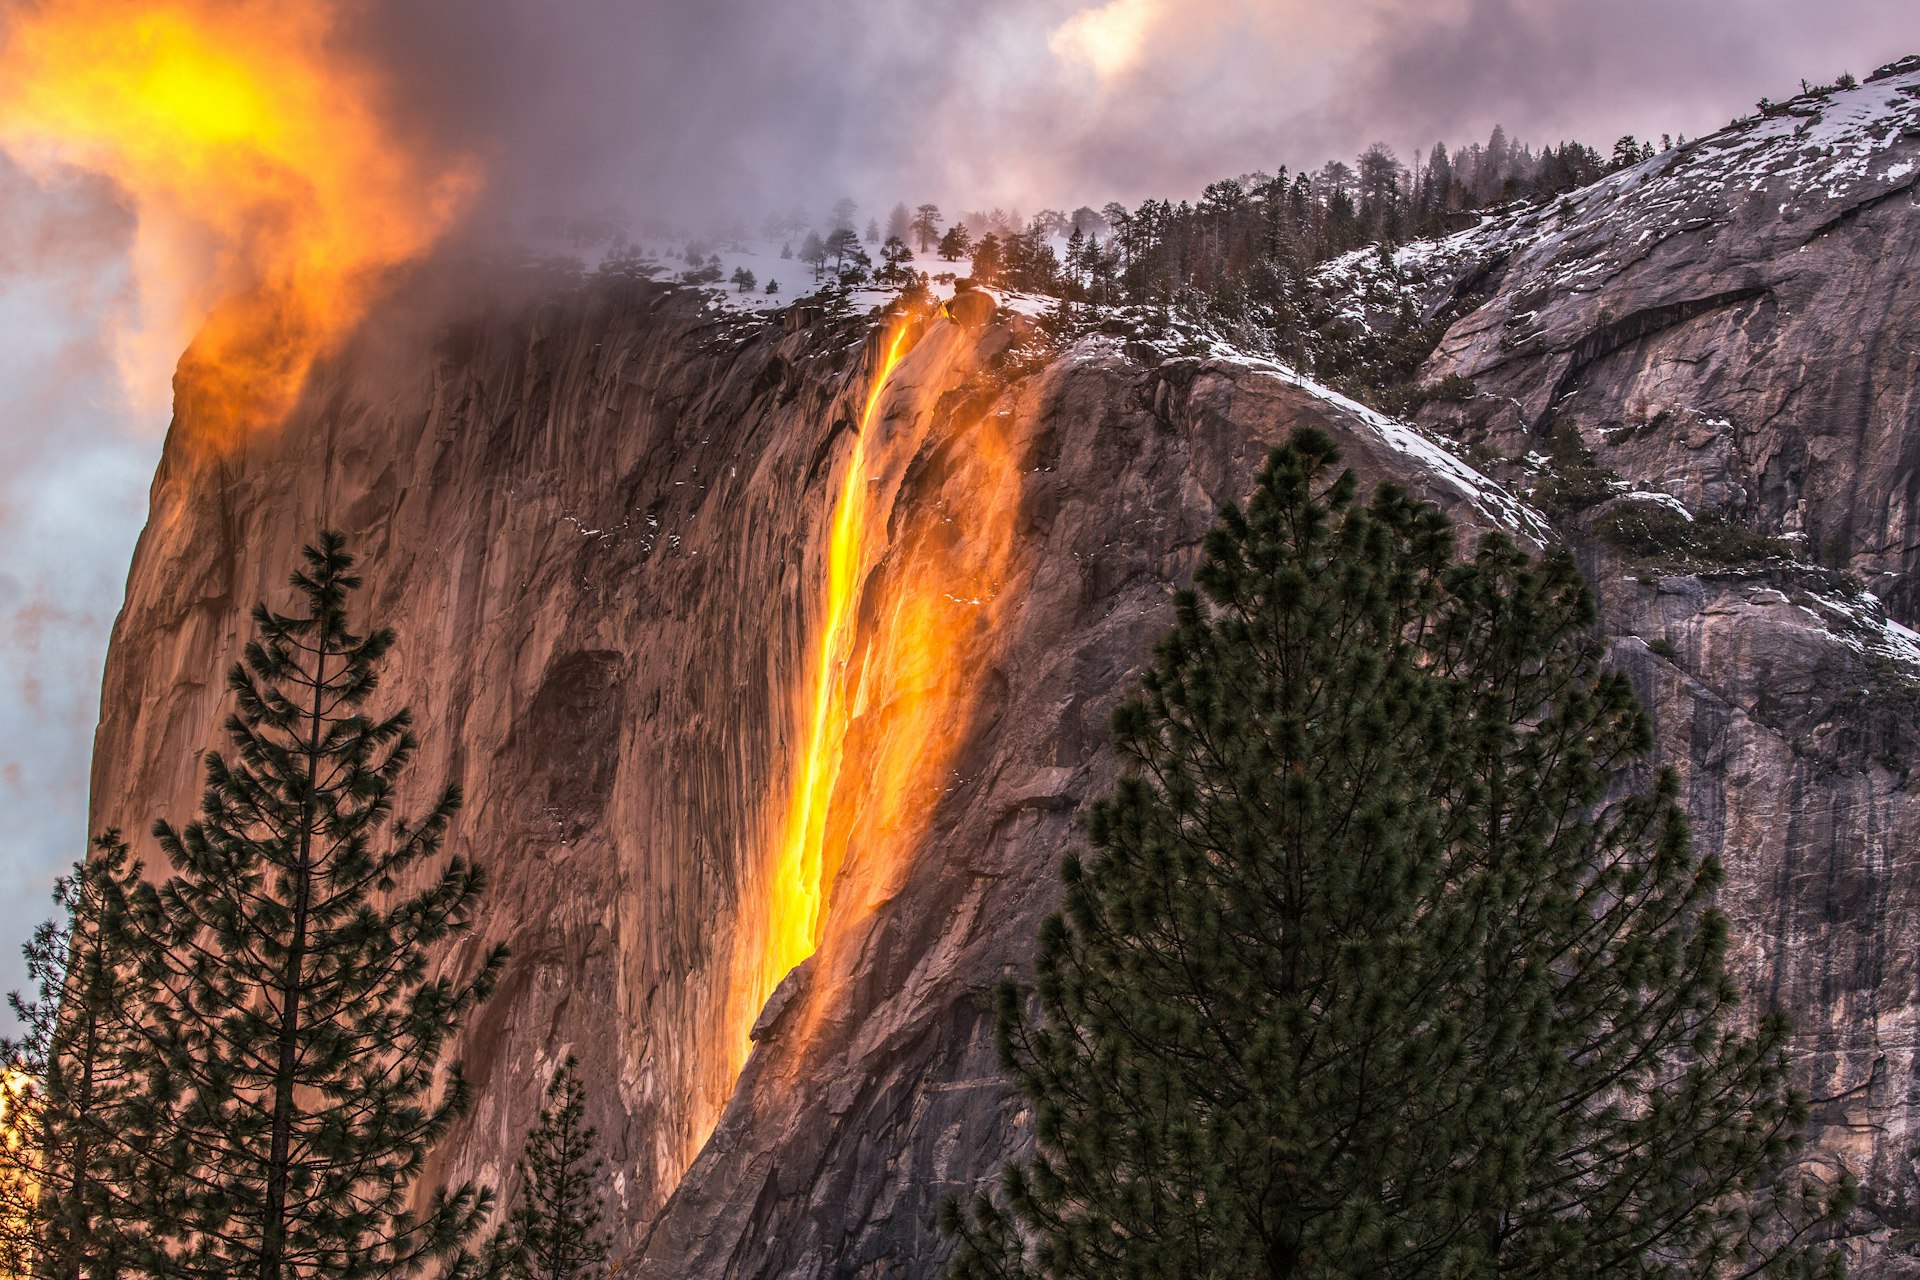 Yosemite's Horsetail Falls, illuminated by the setting sun so the water appears to be flowing lava